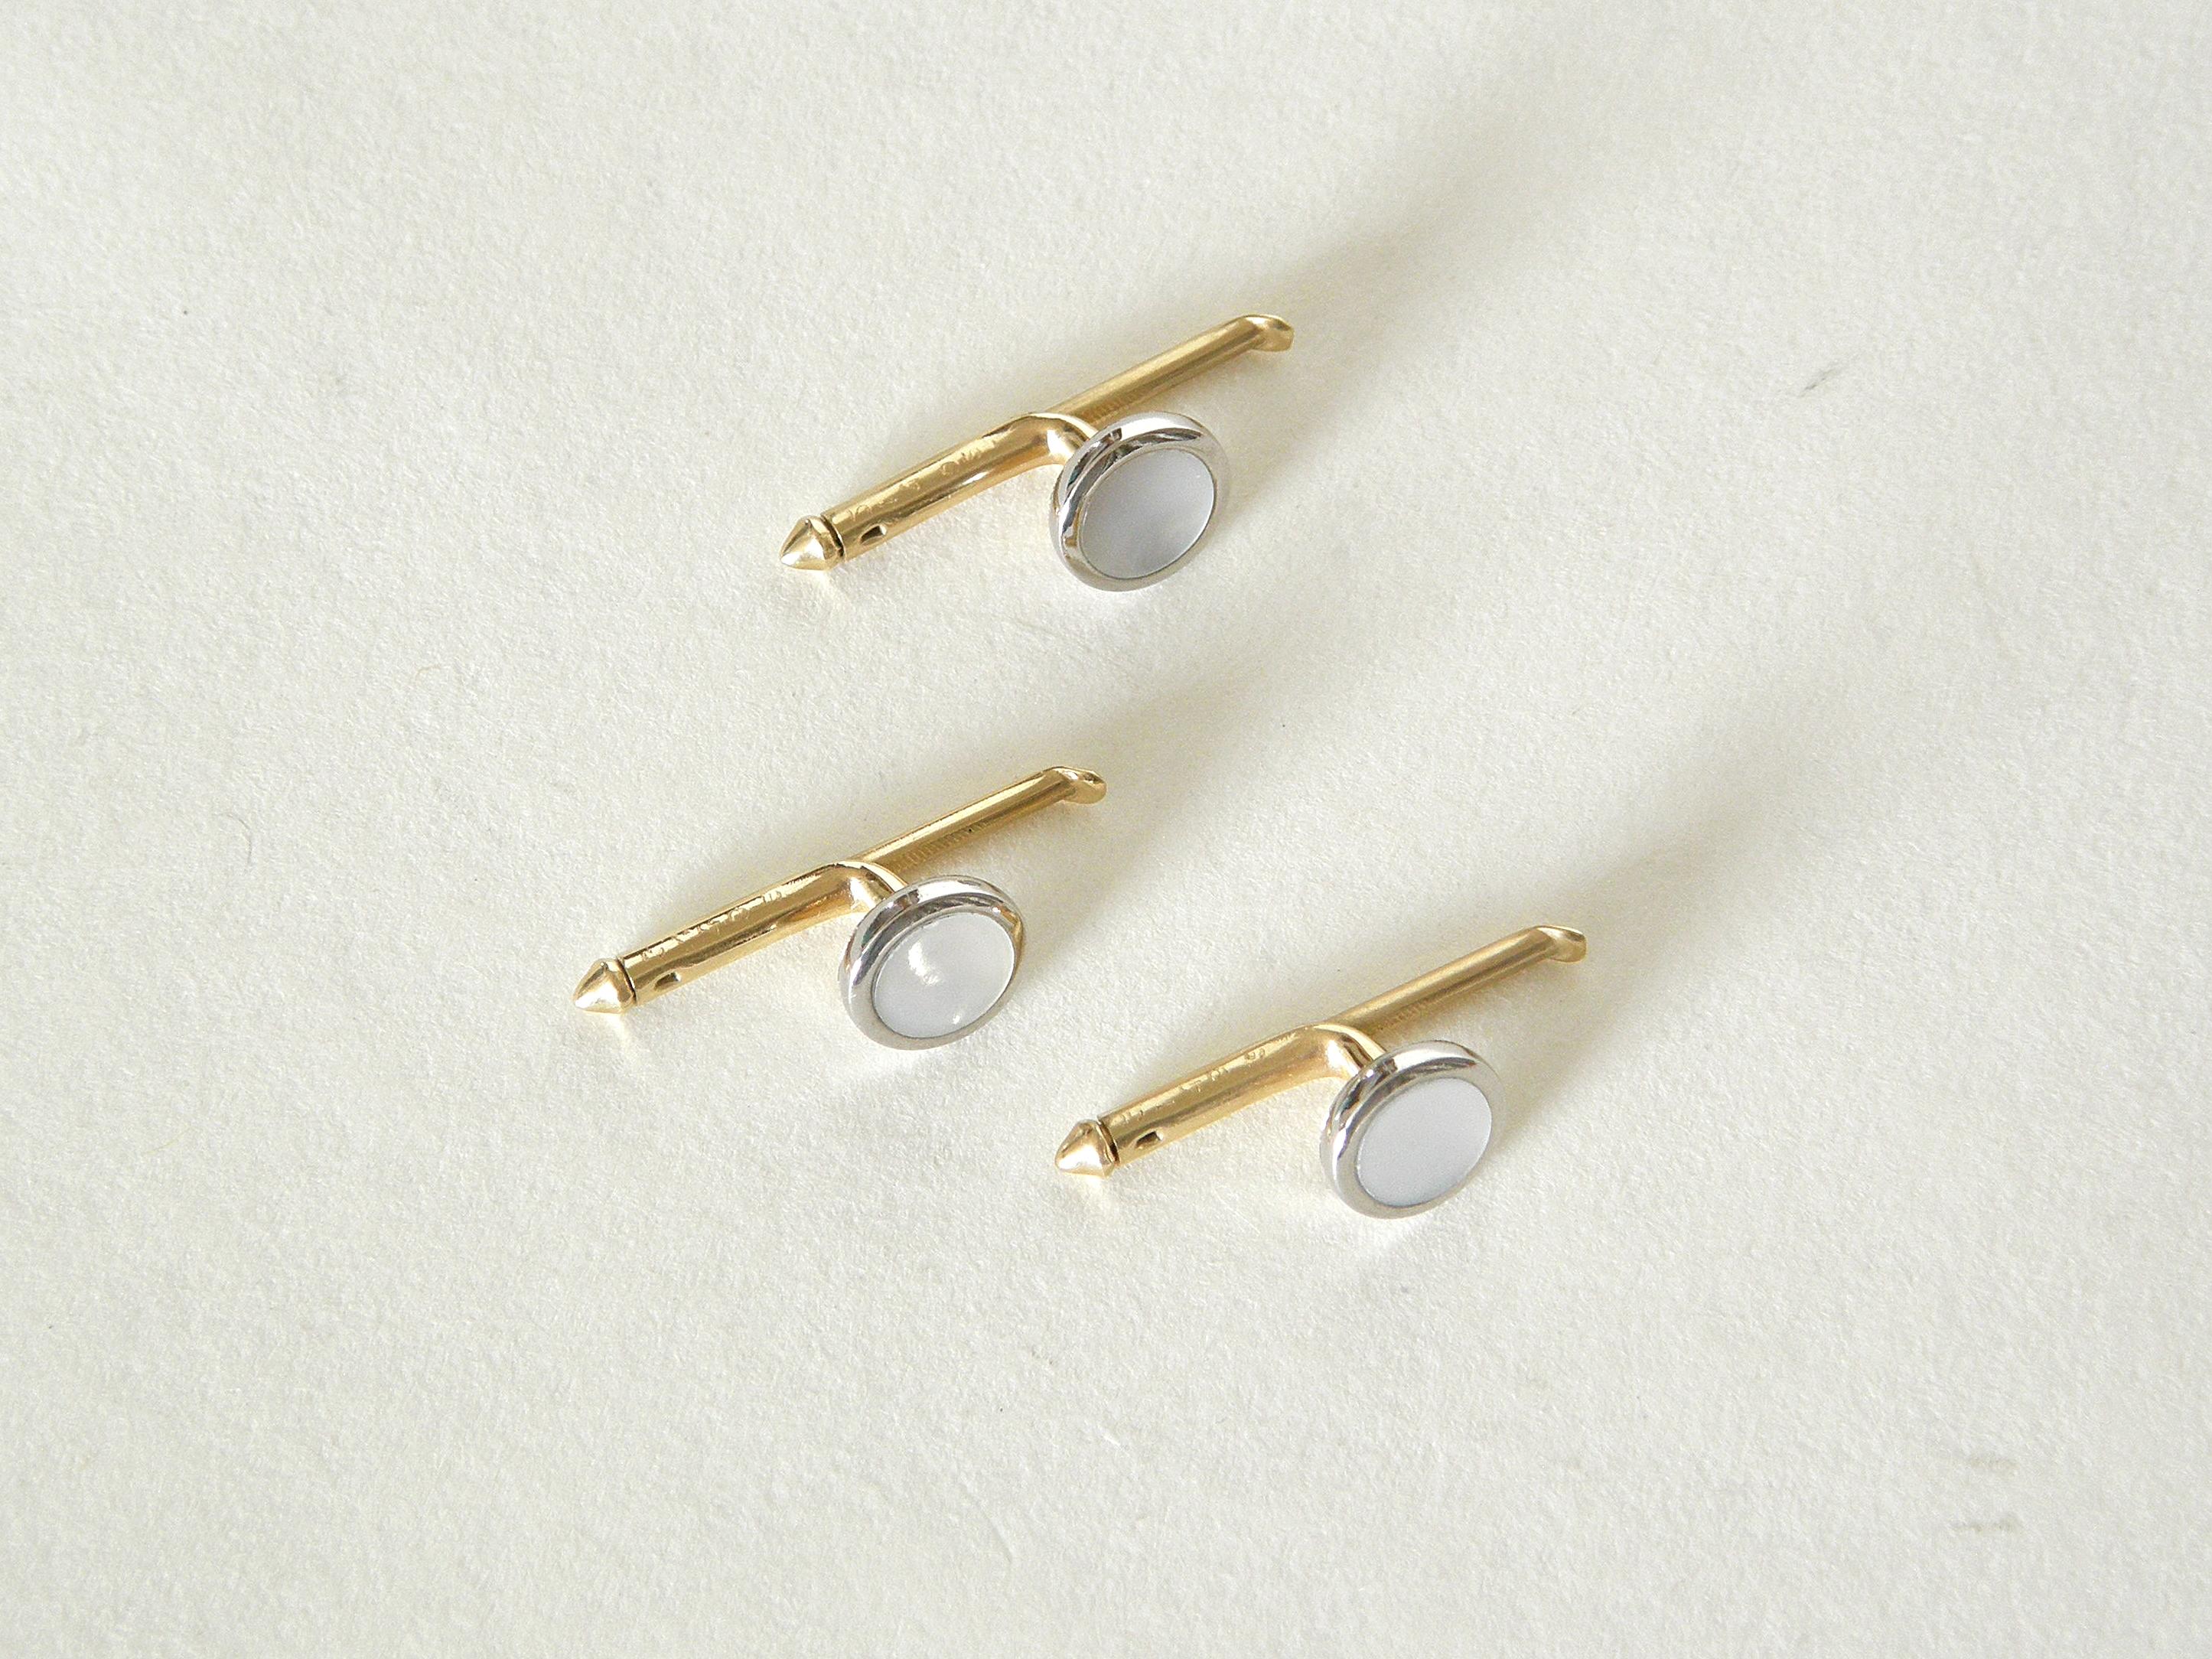 Art Deco Cartier 14K Gold Cufflinks and Studs Set with Mother of Pearl by Larter and Sons